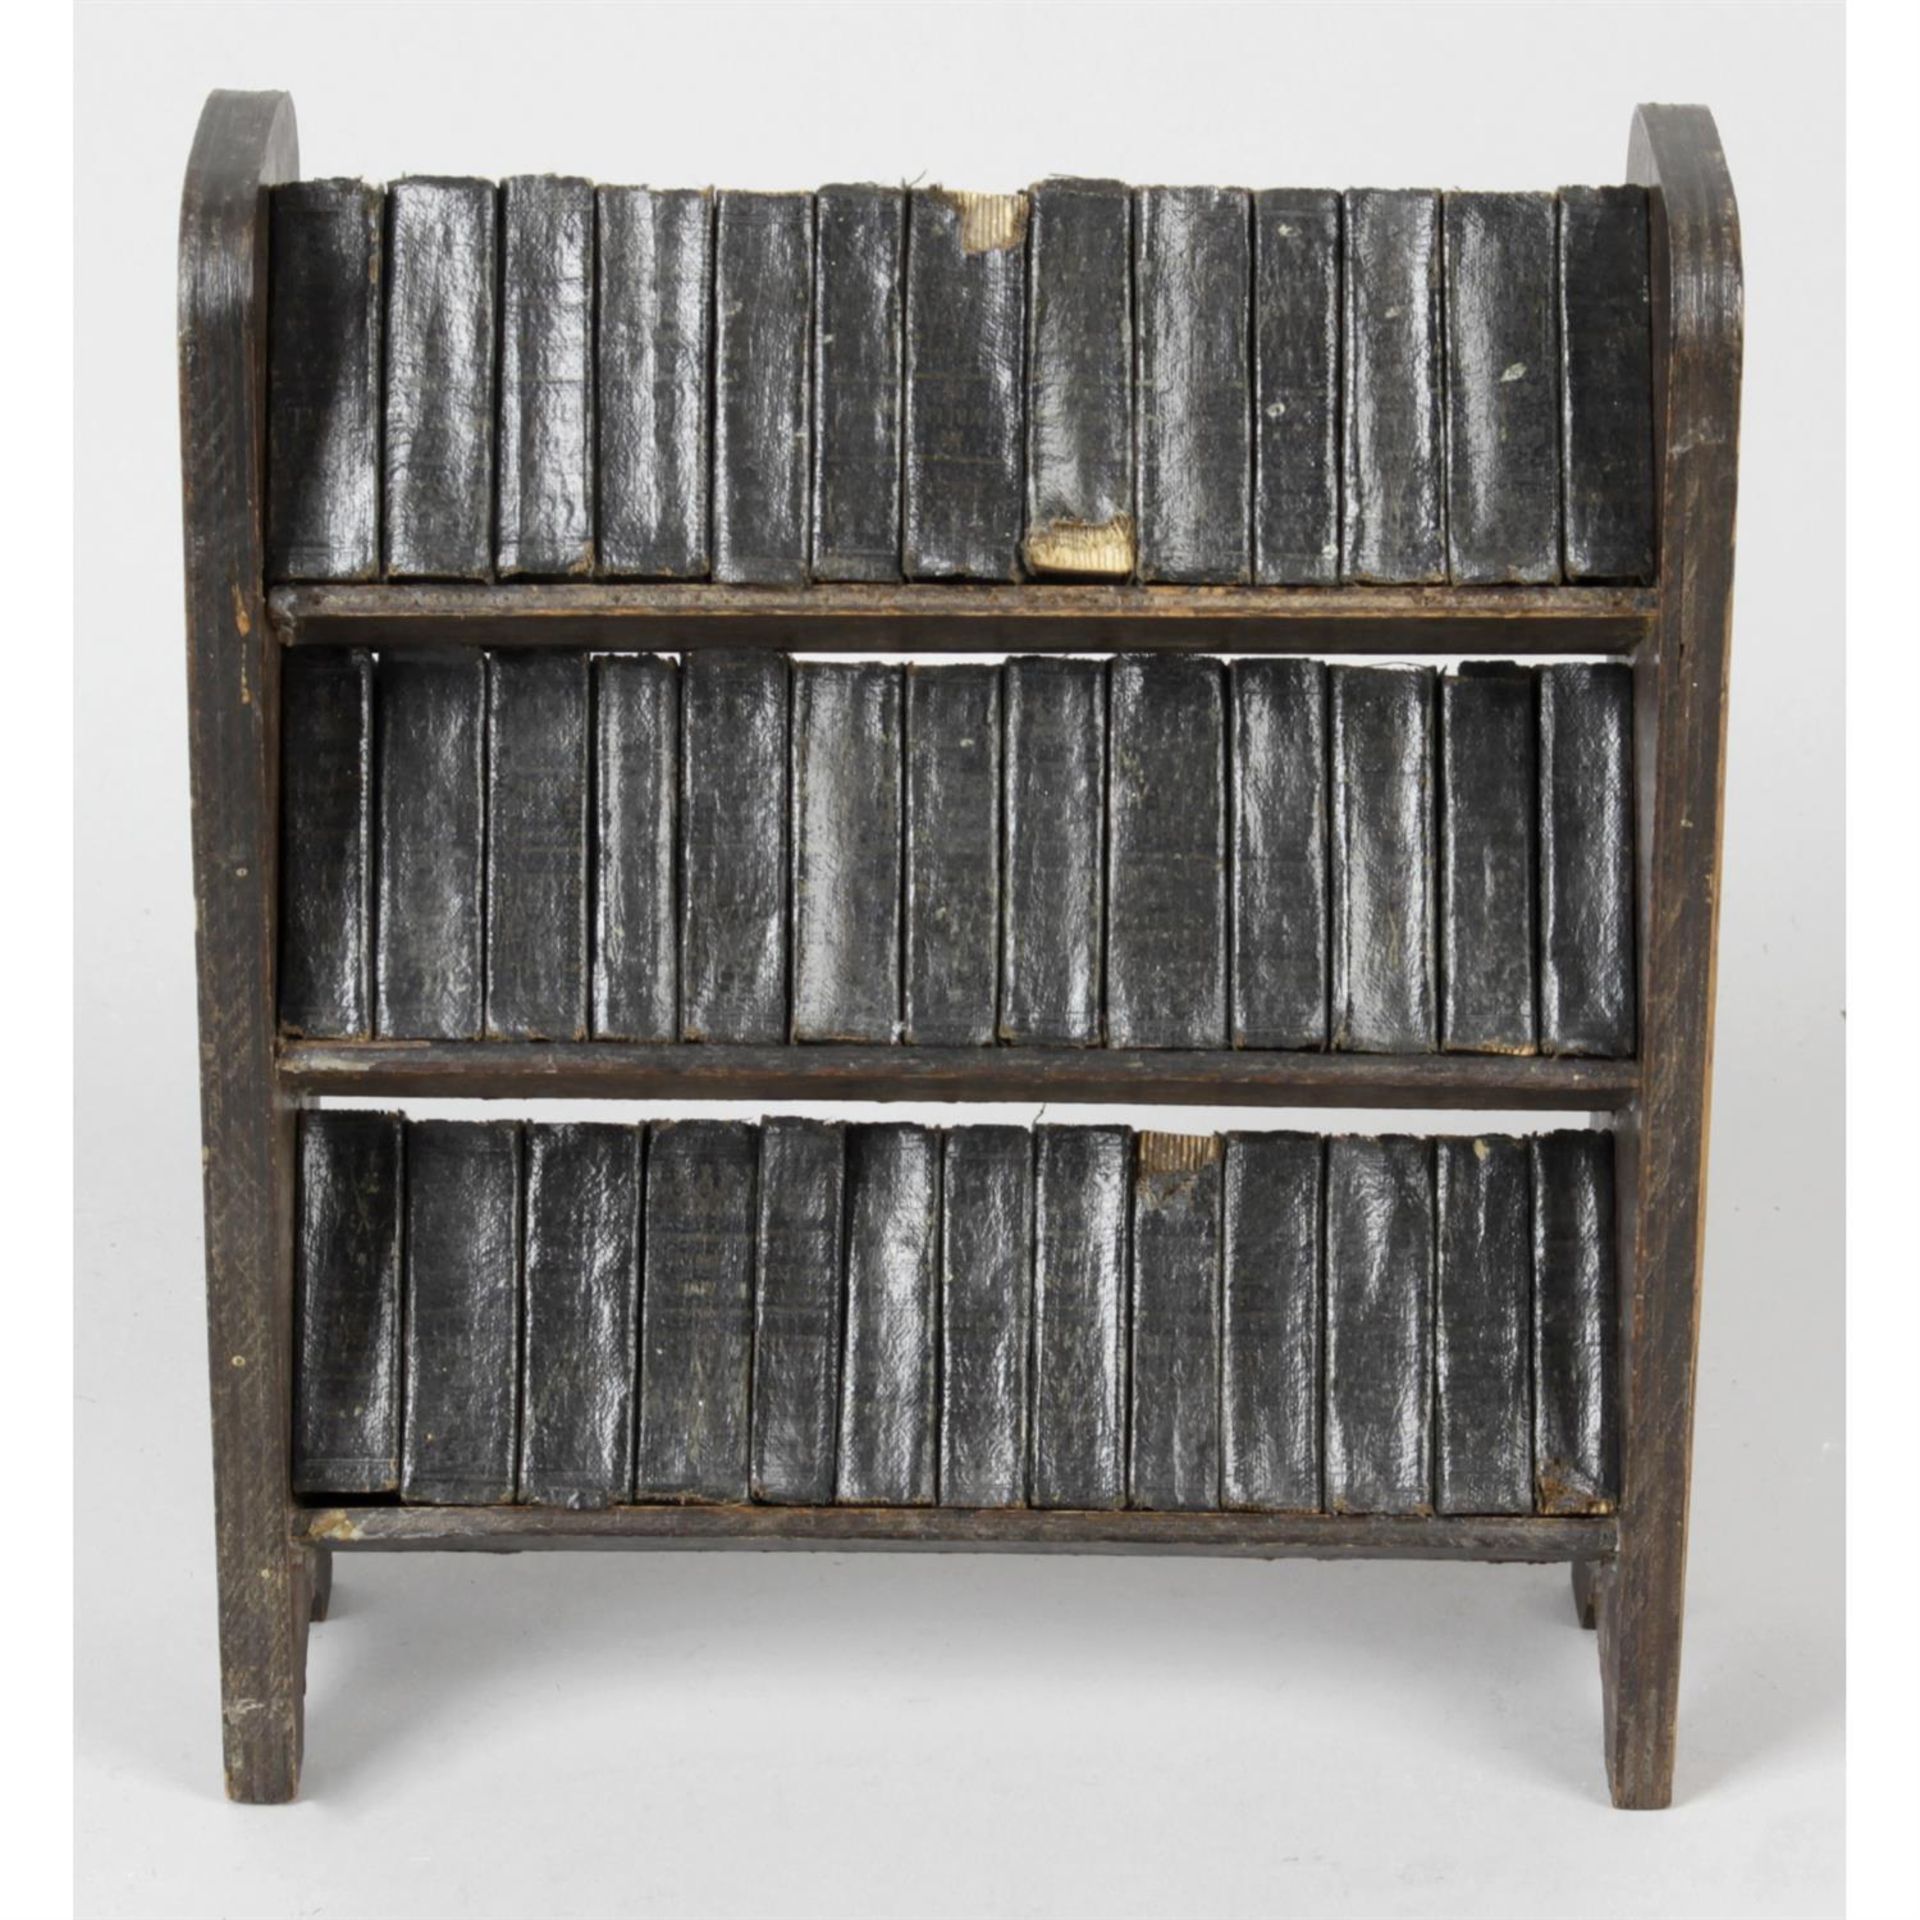 A miniature stained wooden book rack containing 39 miniature books.